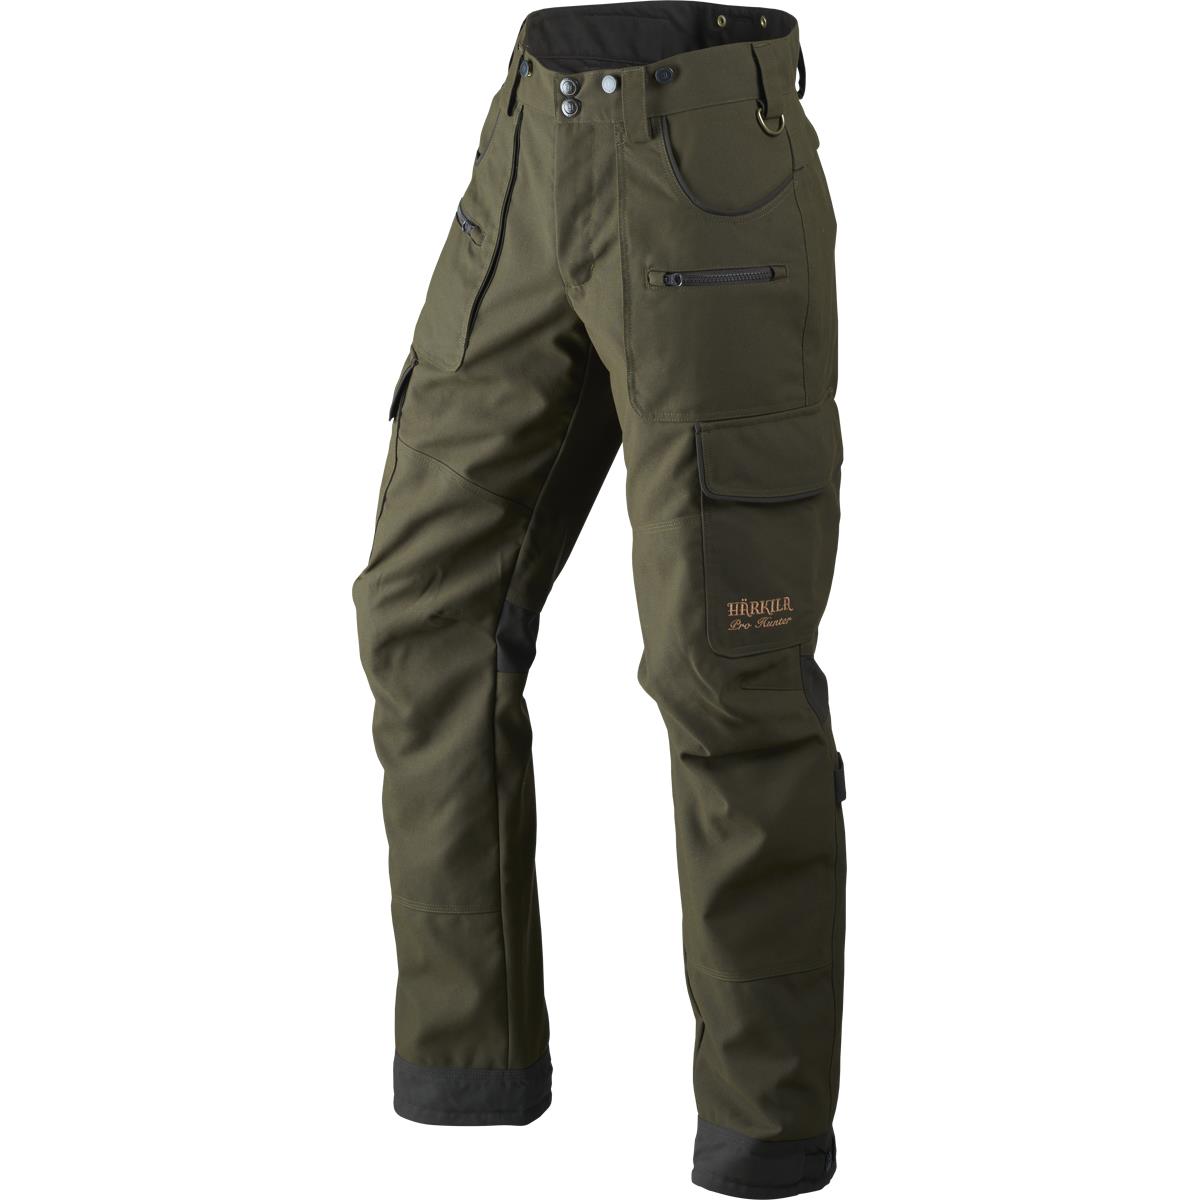 What are the reference number and MPN of Harkila Pro Hunter trousers?